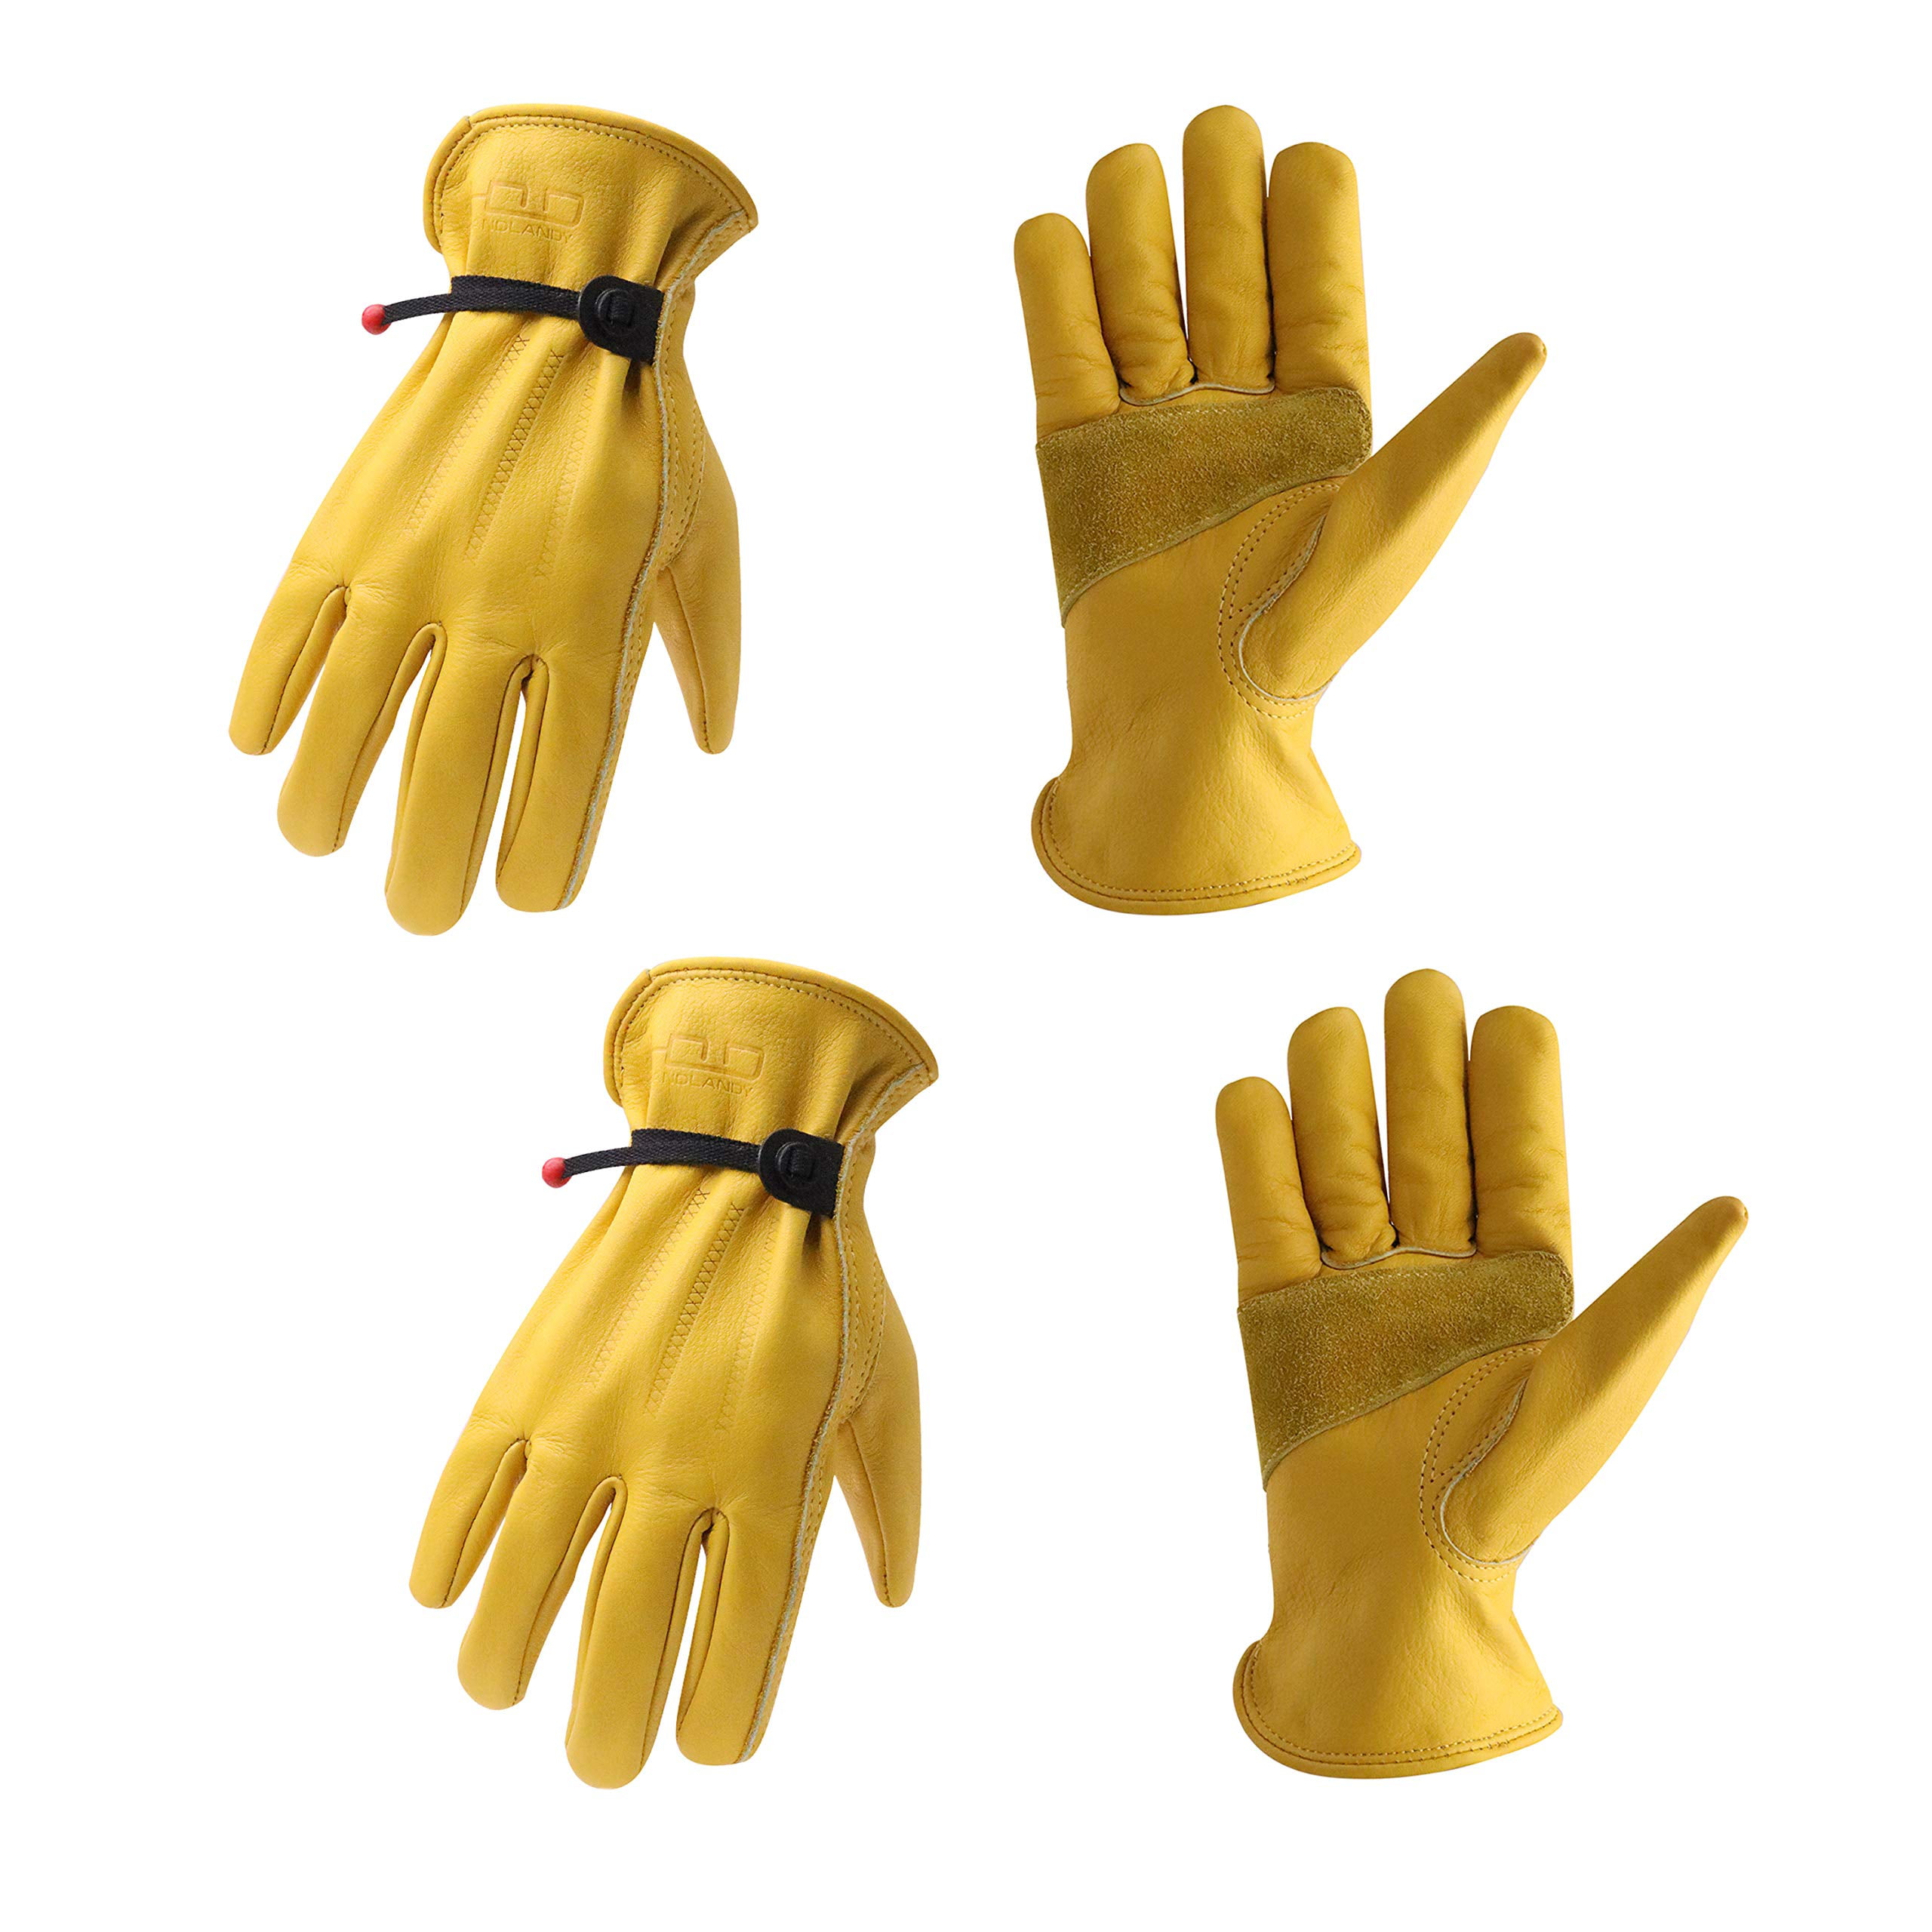 HANDLANDY 2 Pairs Cowhide Leather Work Gloves for Men Women,Adjustable  Wrist, Puncture and Cut Resistant, Rigger Glove for Driver, Yardwork,  Gardening (Large, Yellow) 